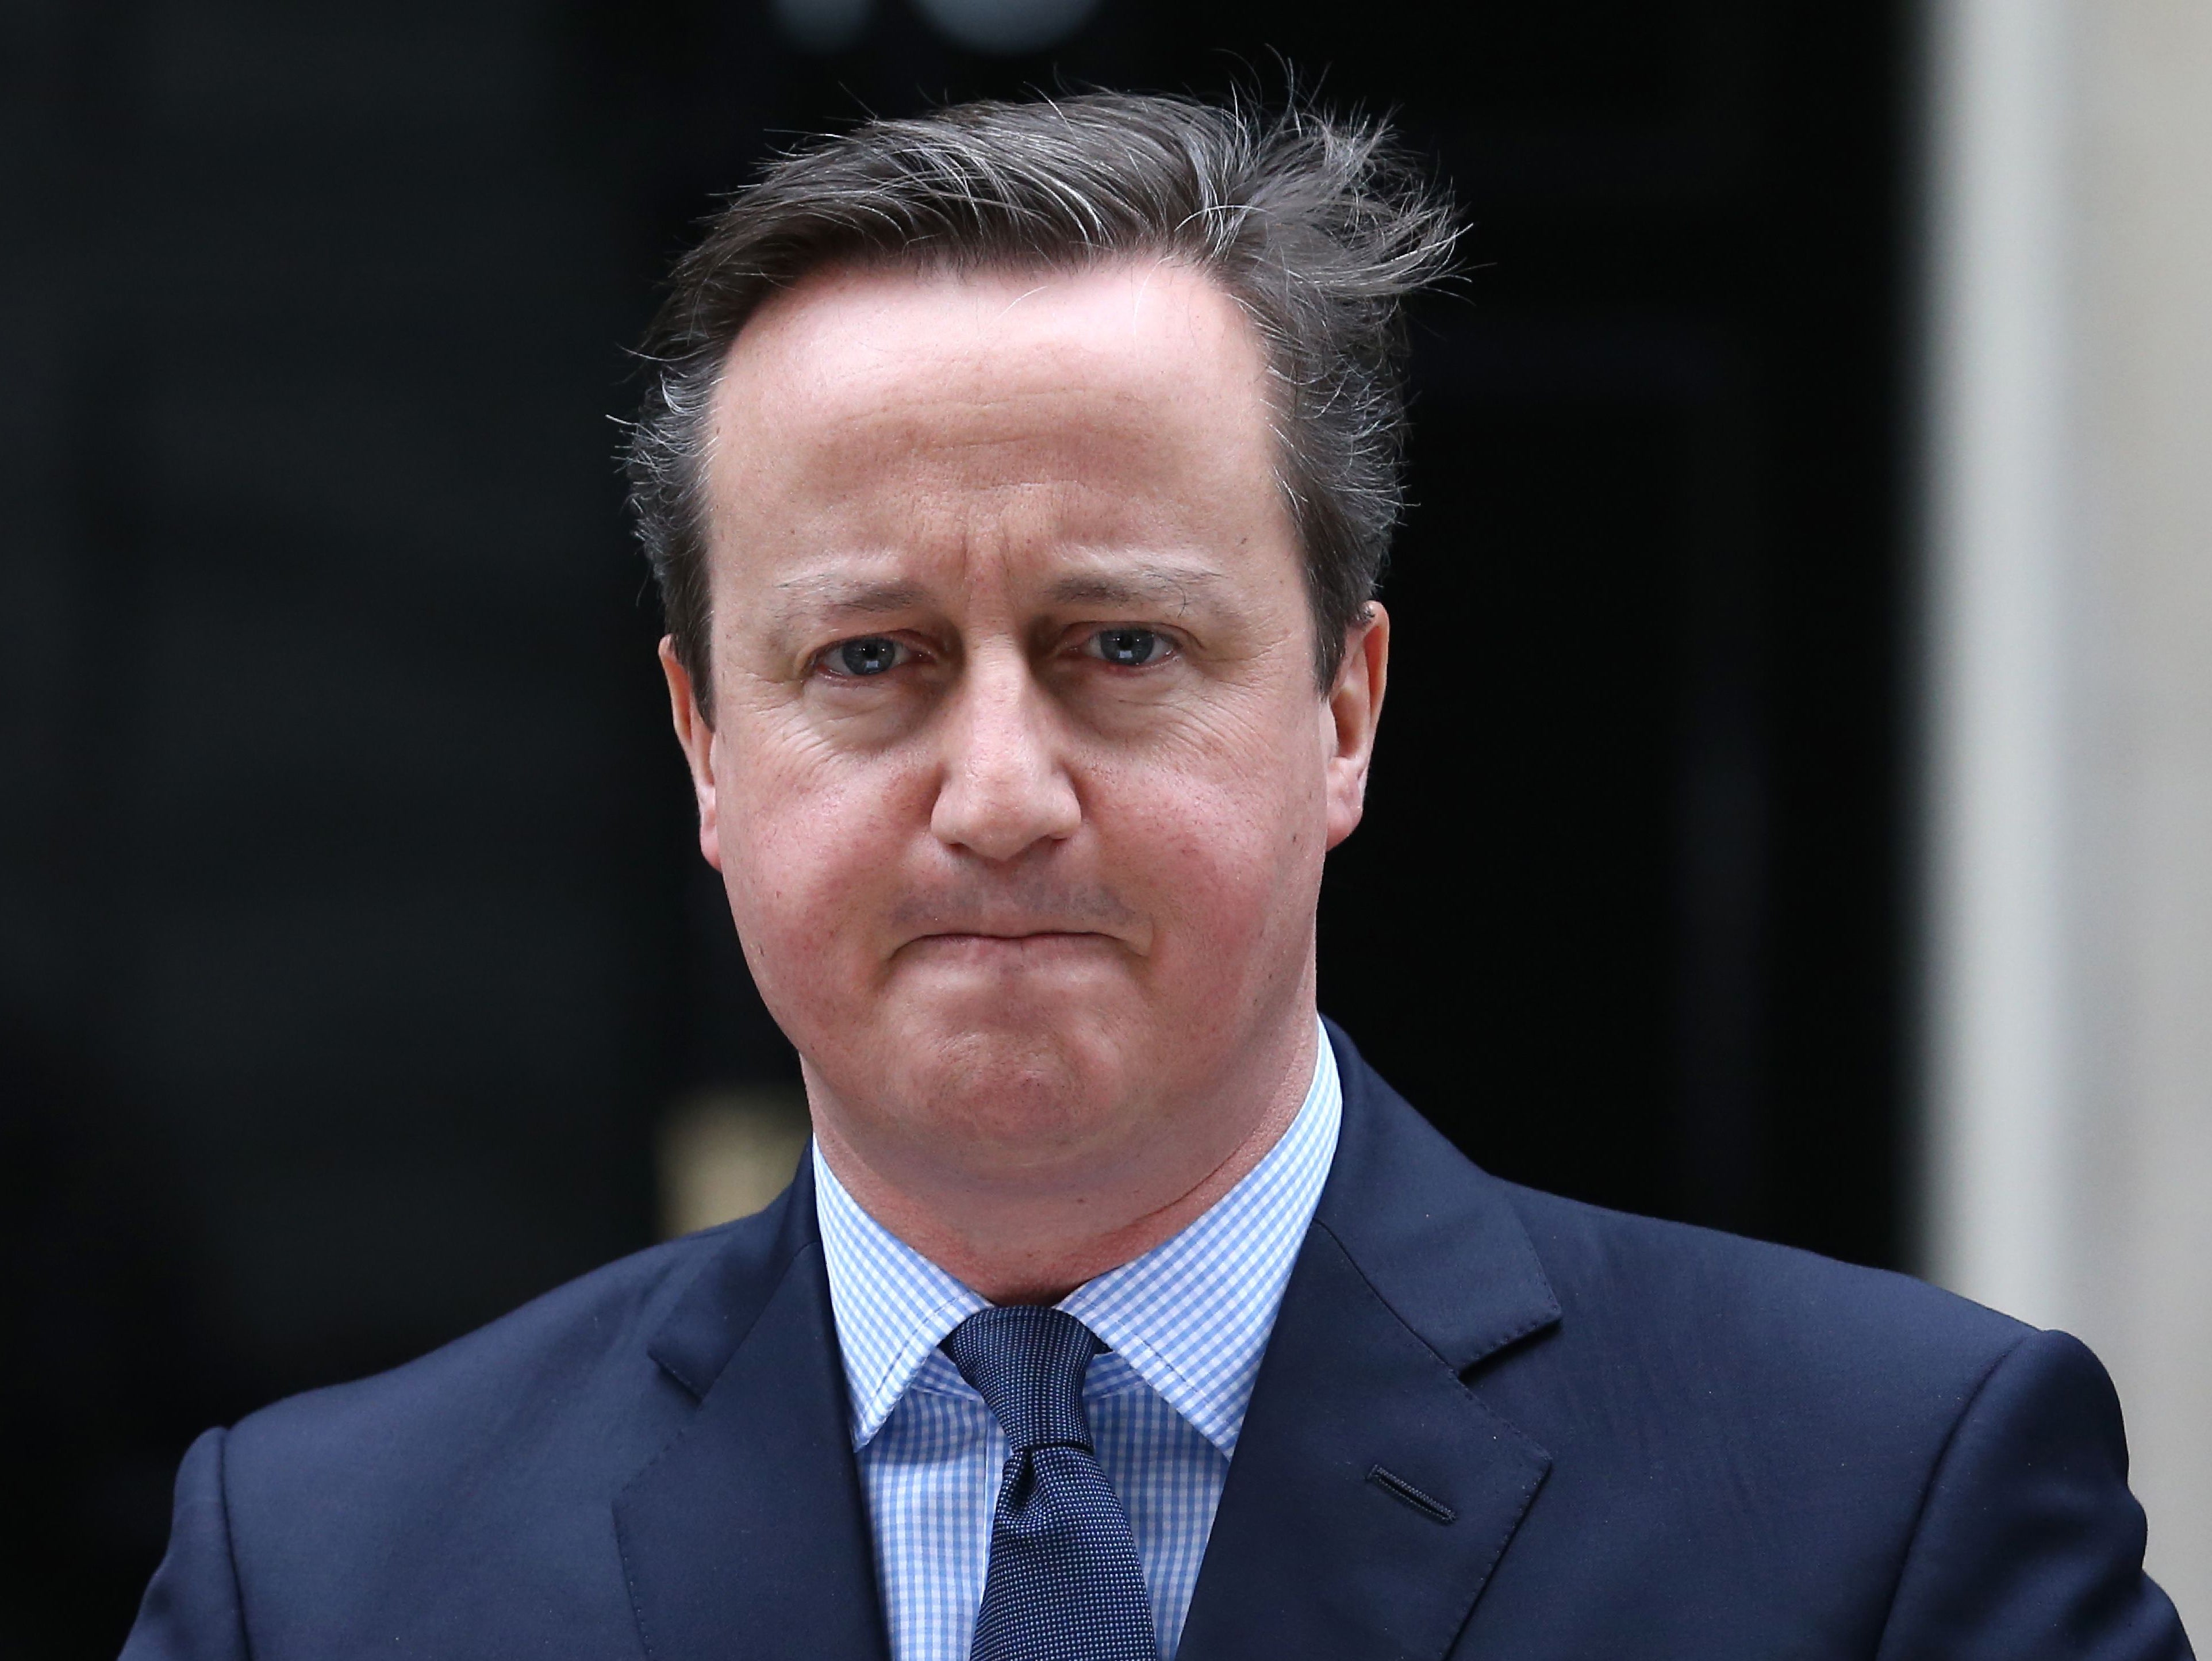 Cameron gambled his premiership on holding an EU referendum – and lost